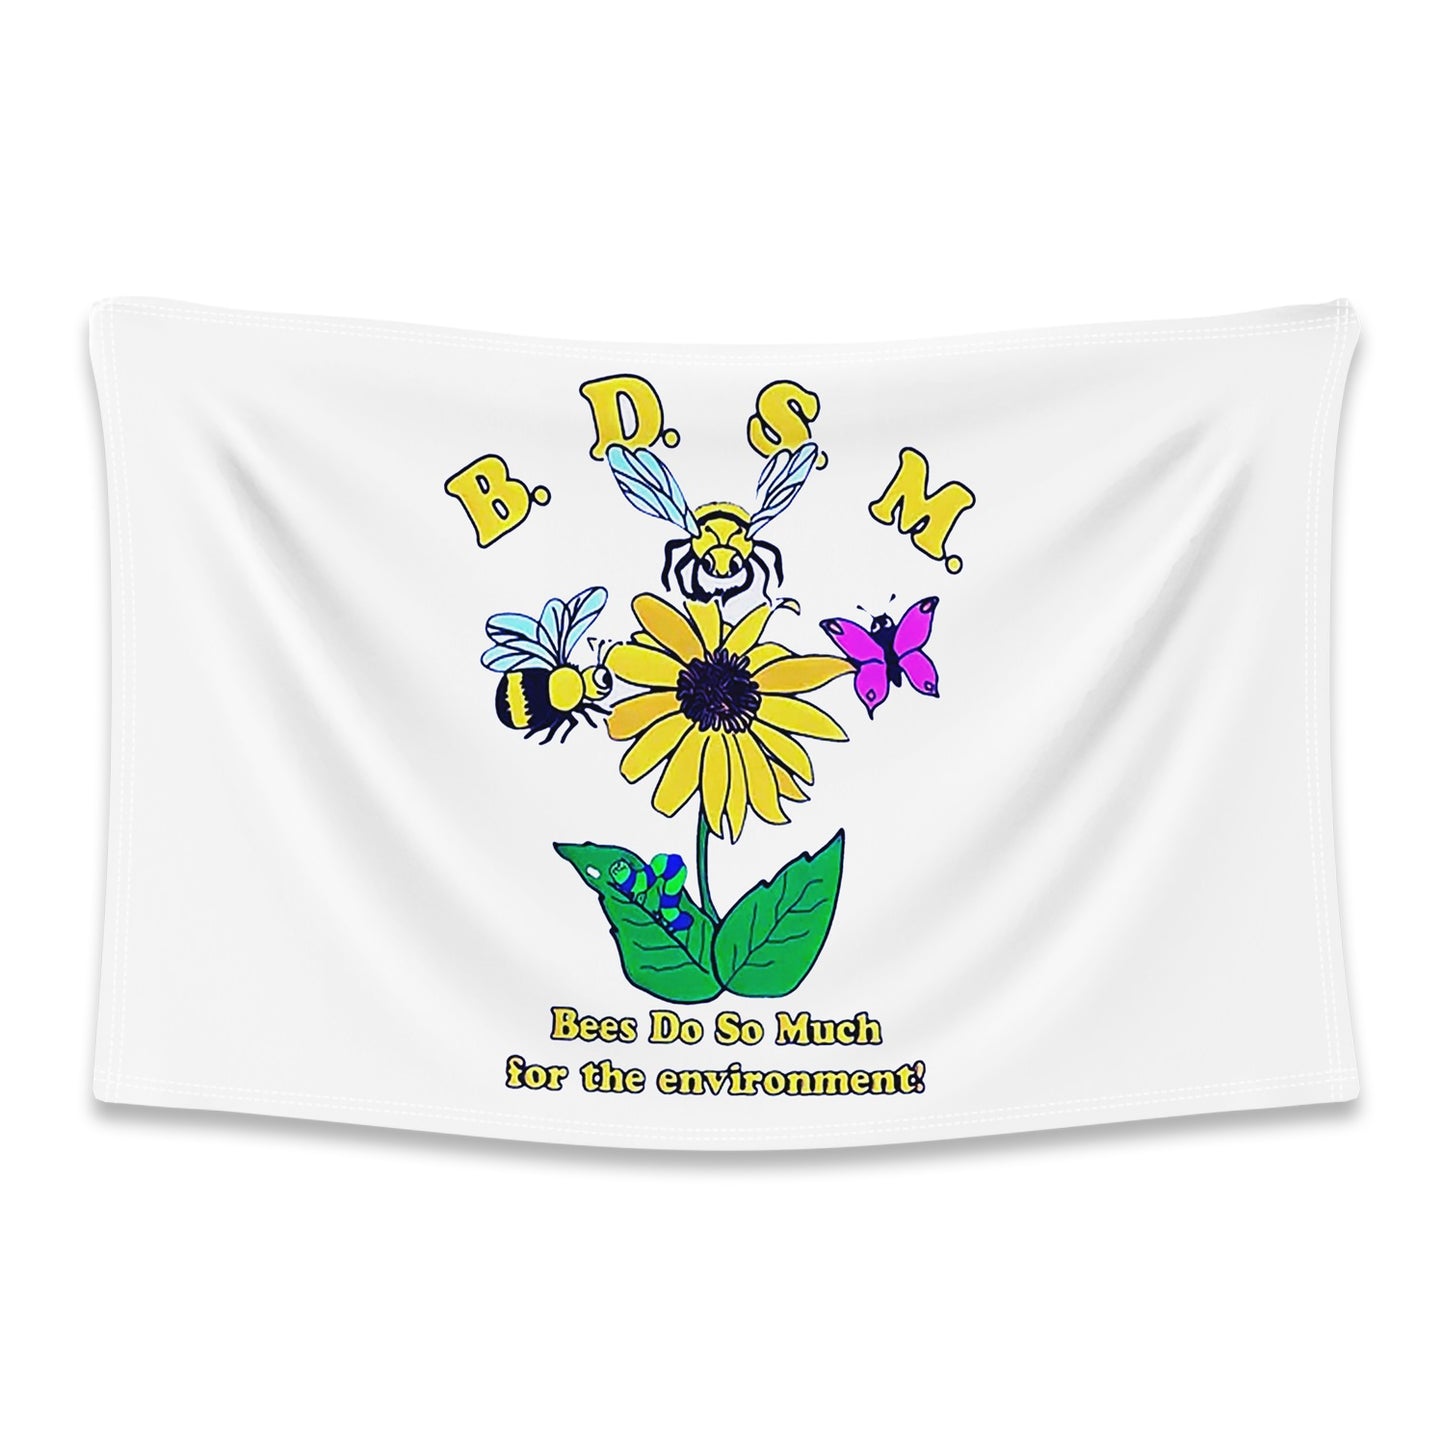 Bees Do So Much Flag